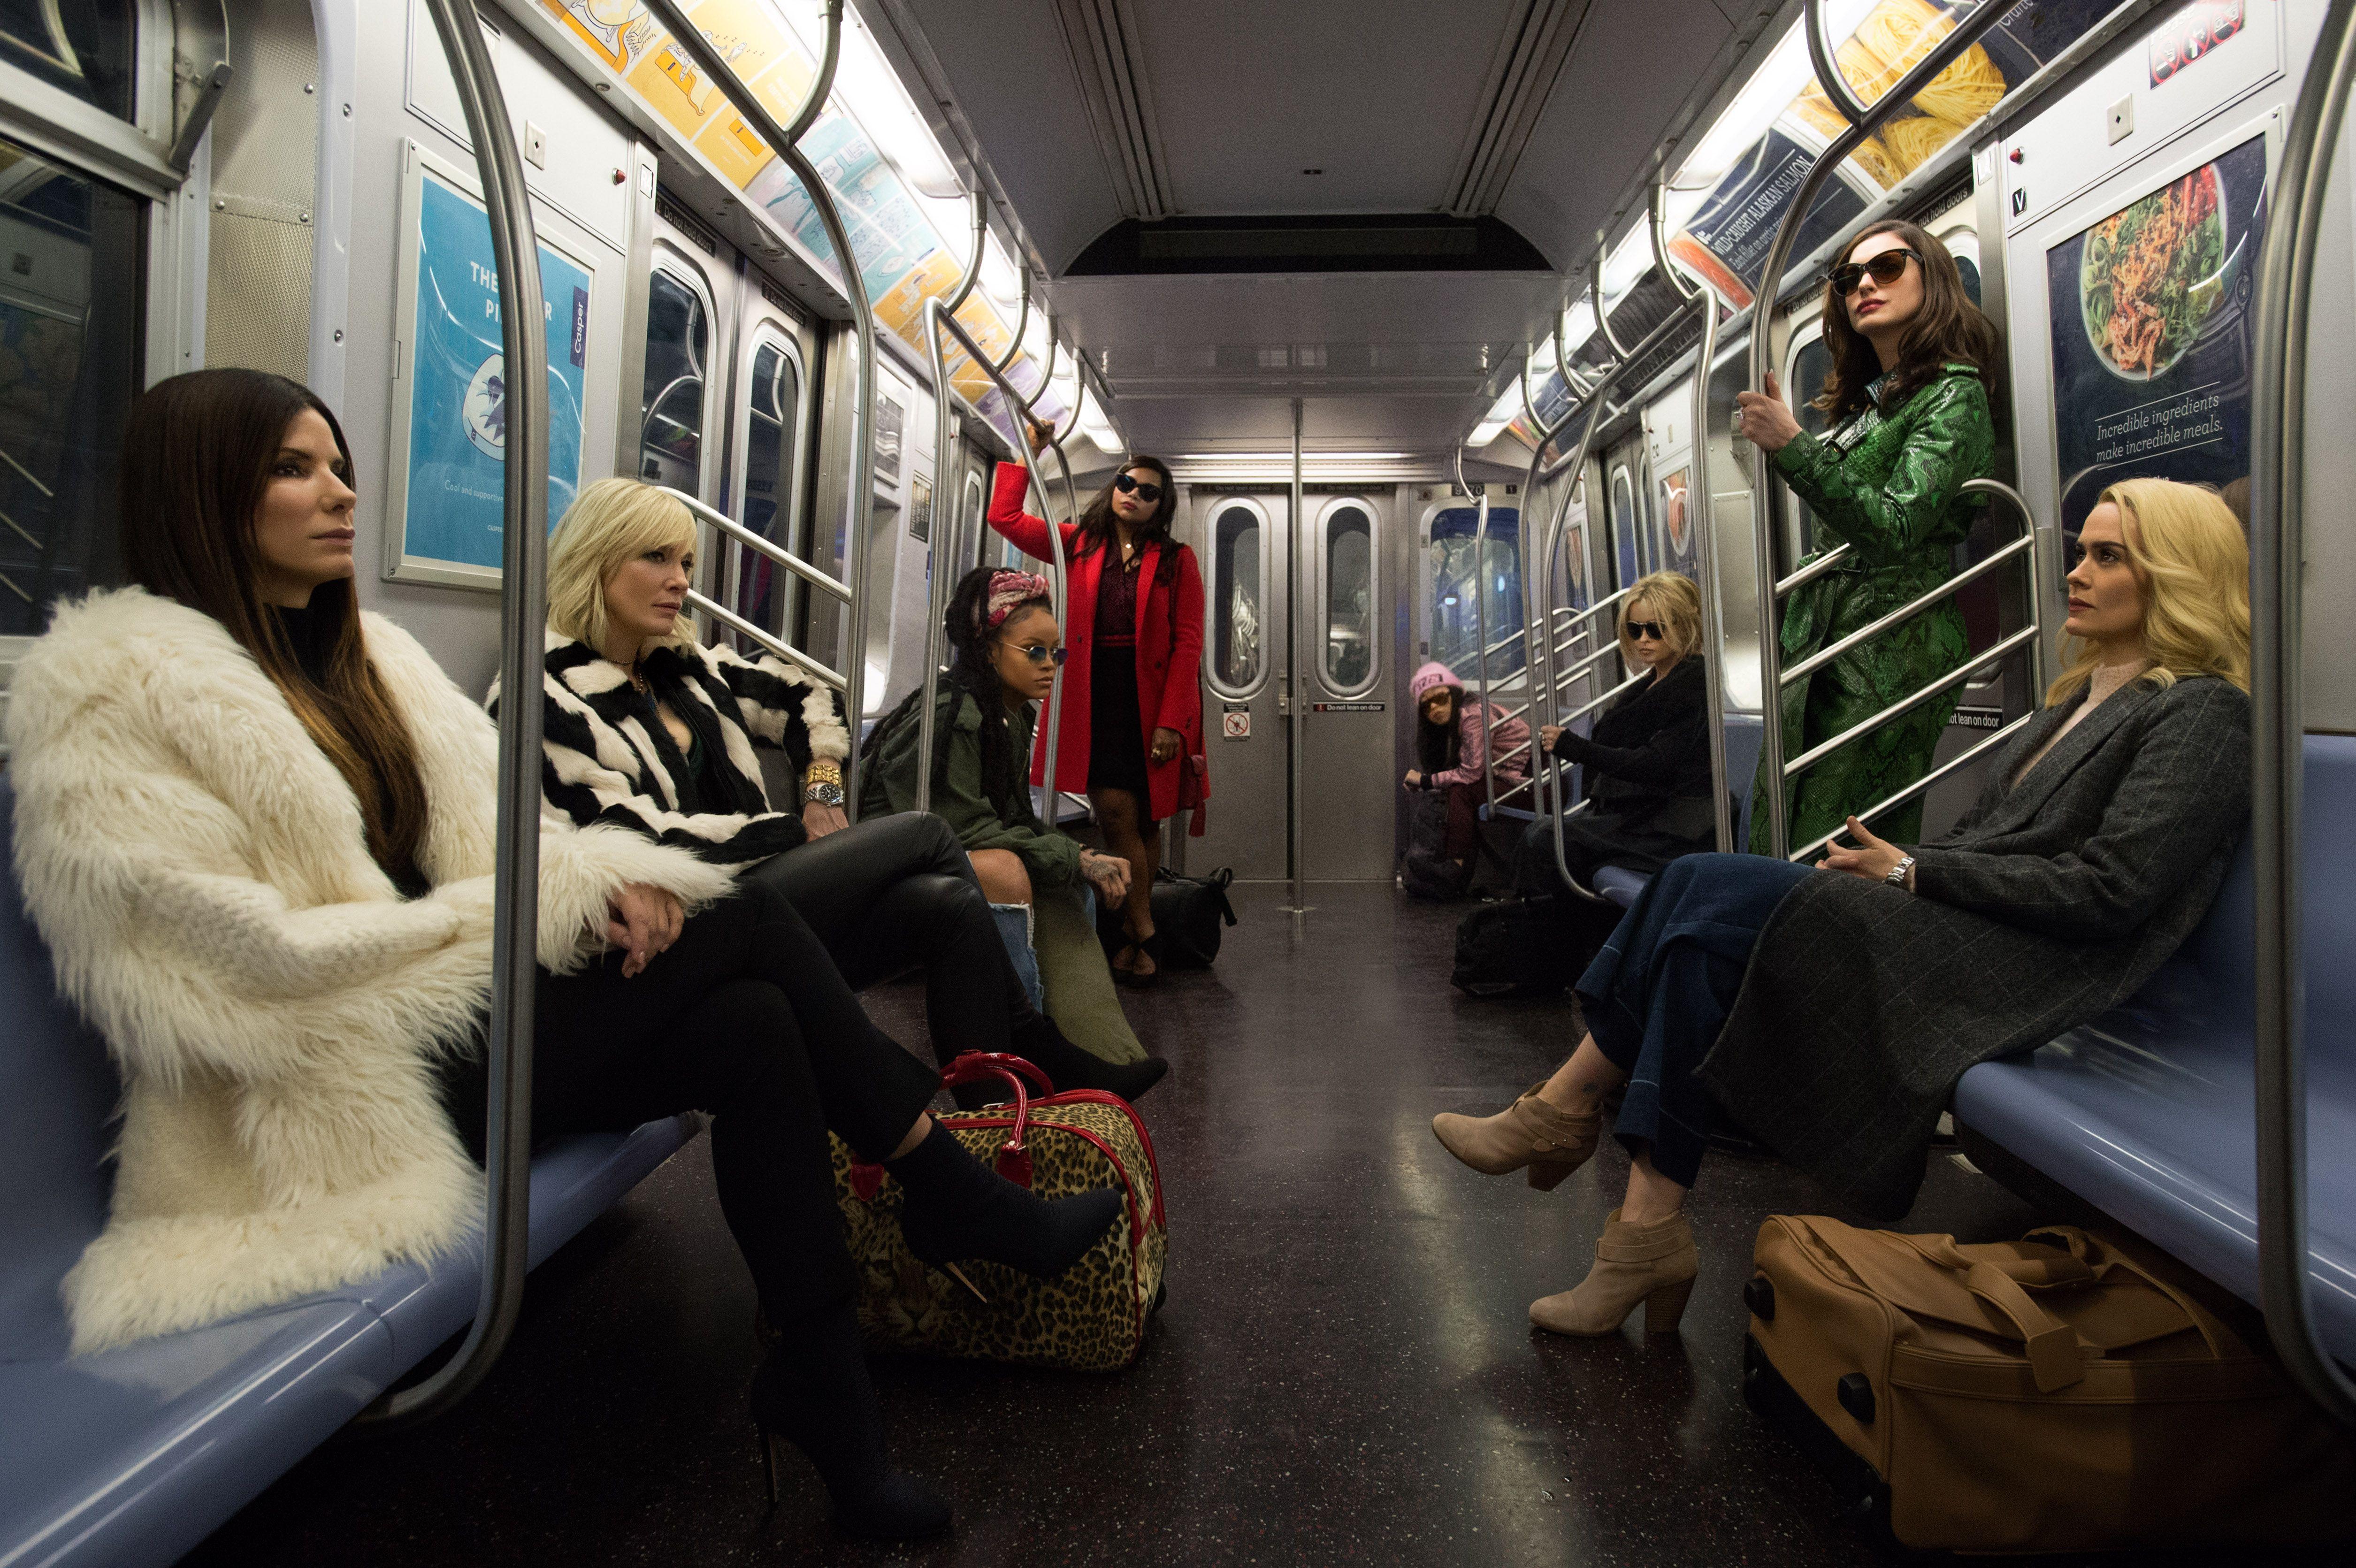 Oceans Eight 2018 Cast, HD Movies, 4k Wallpaper, Image